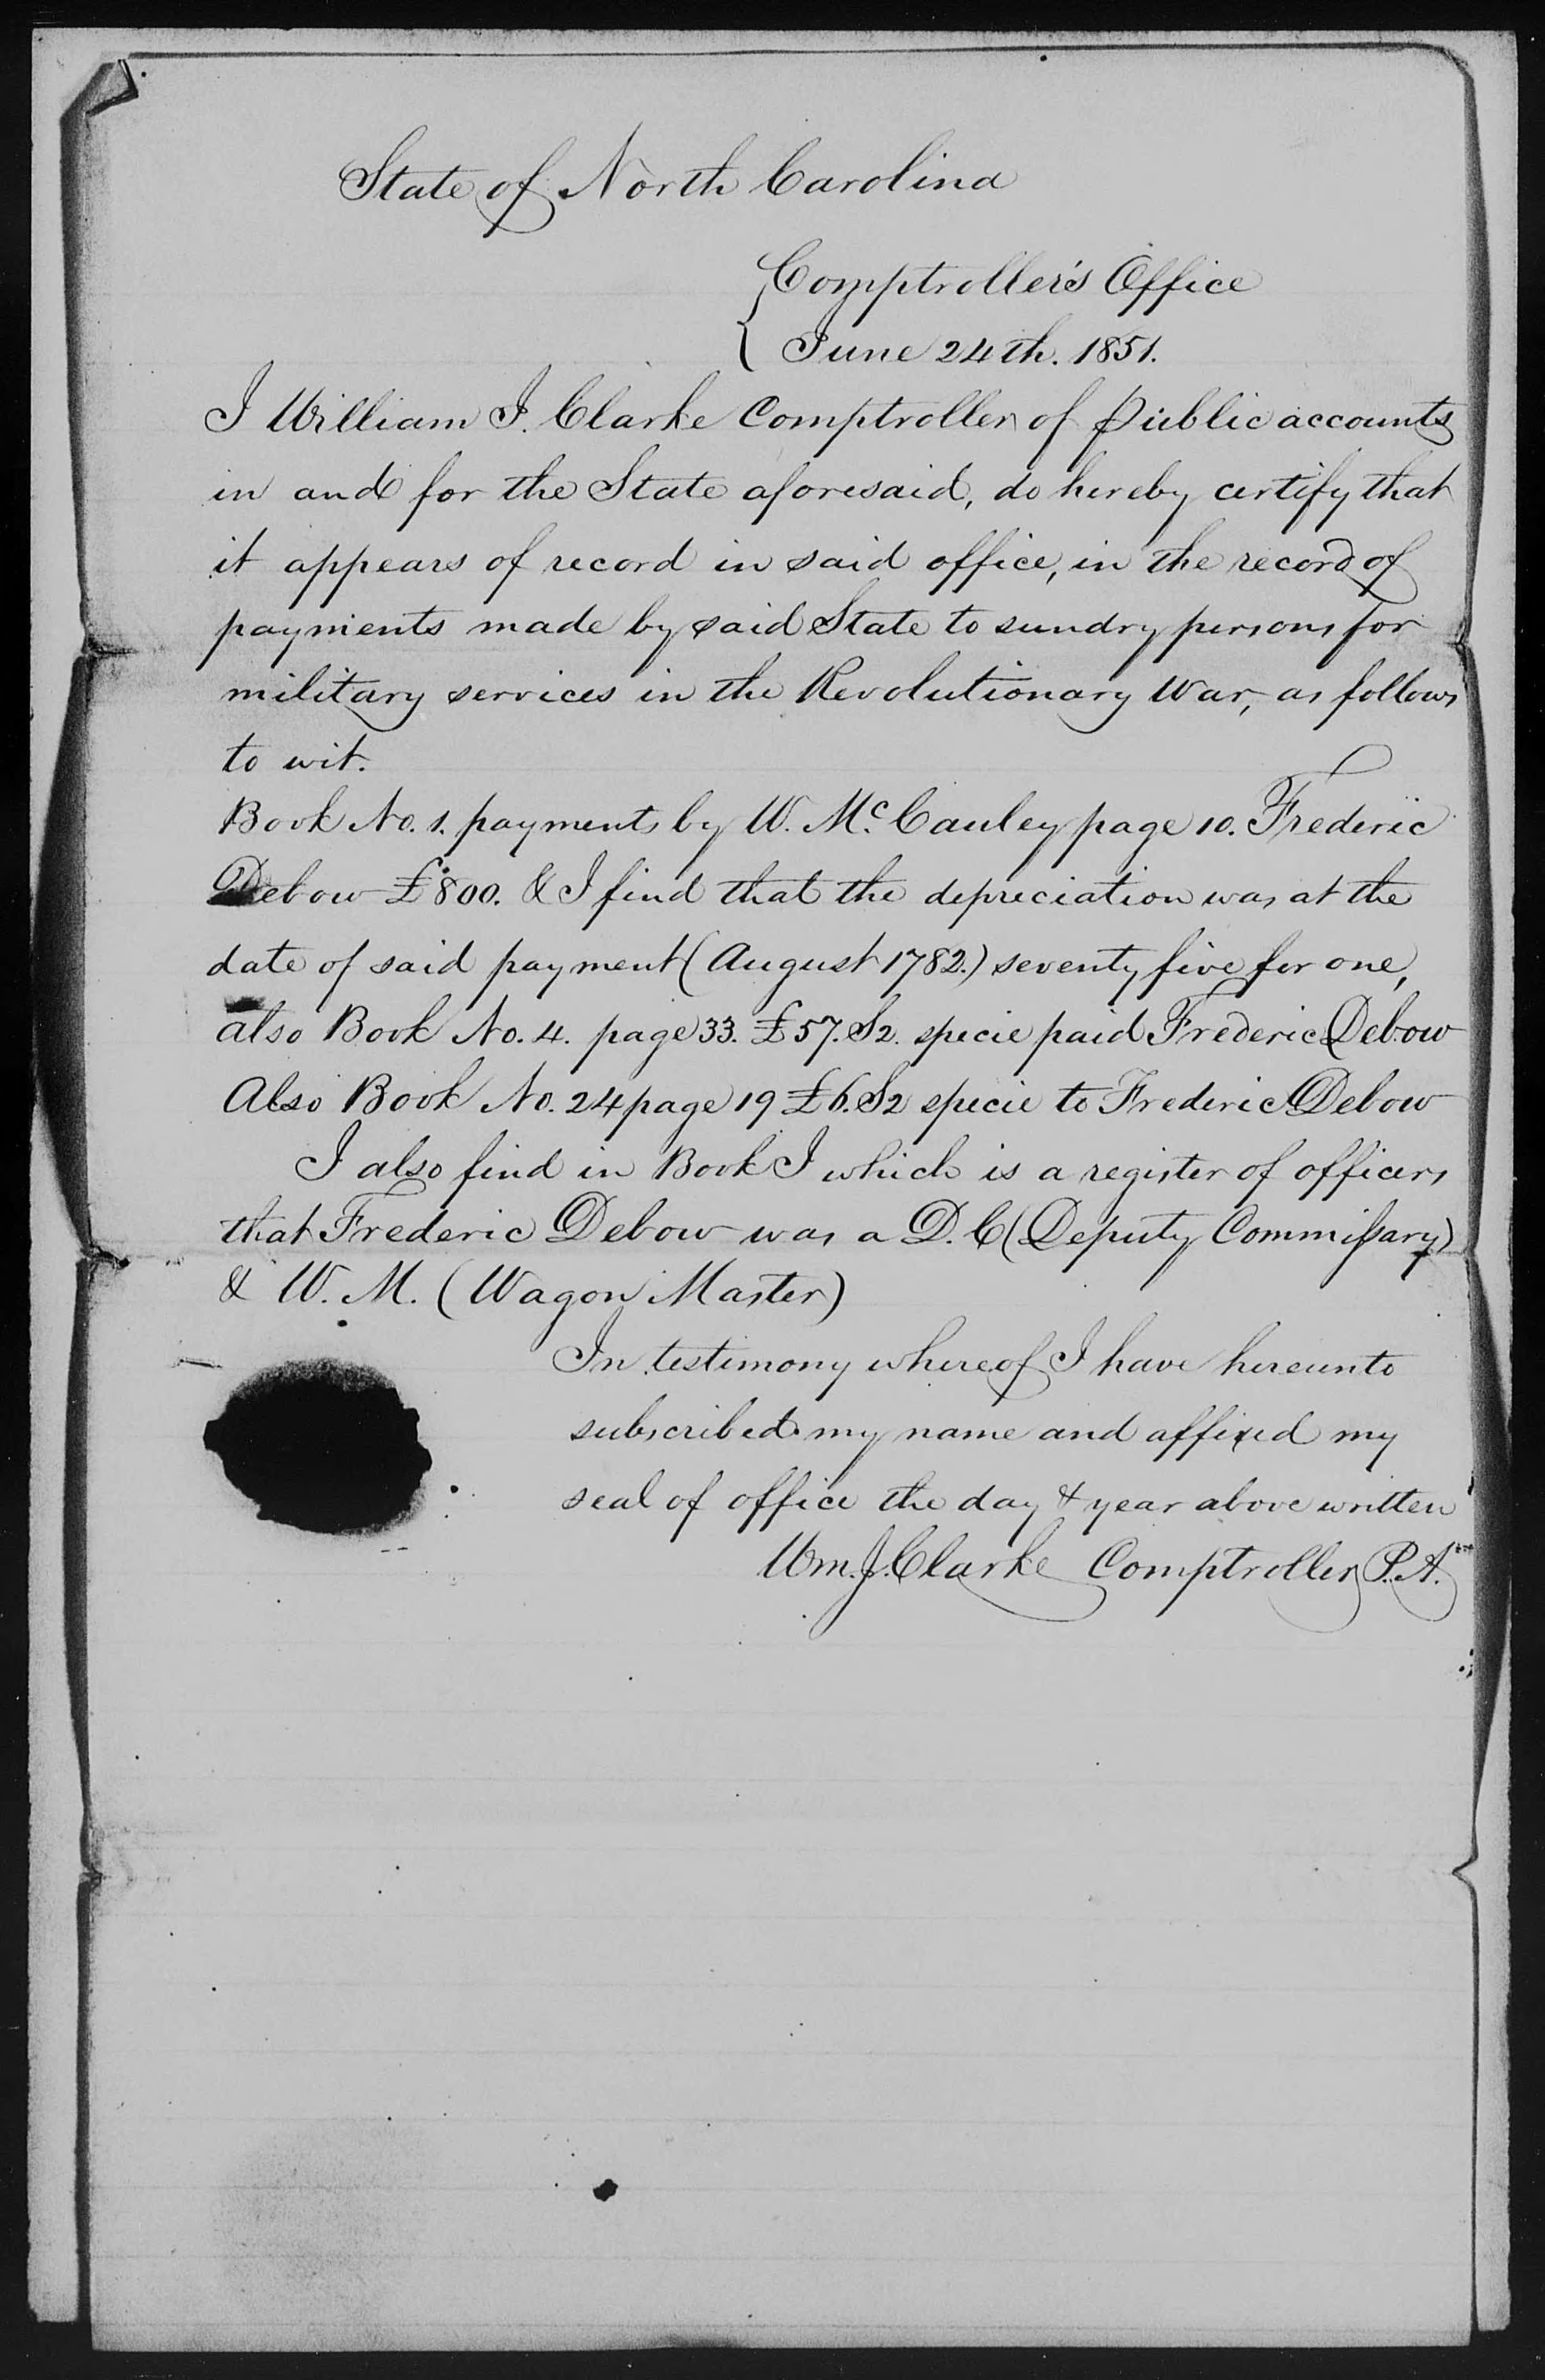 Proof of Service for William J. Clarke, 24 June 1851, page 1